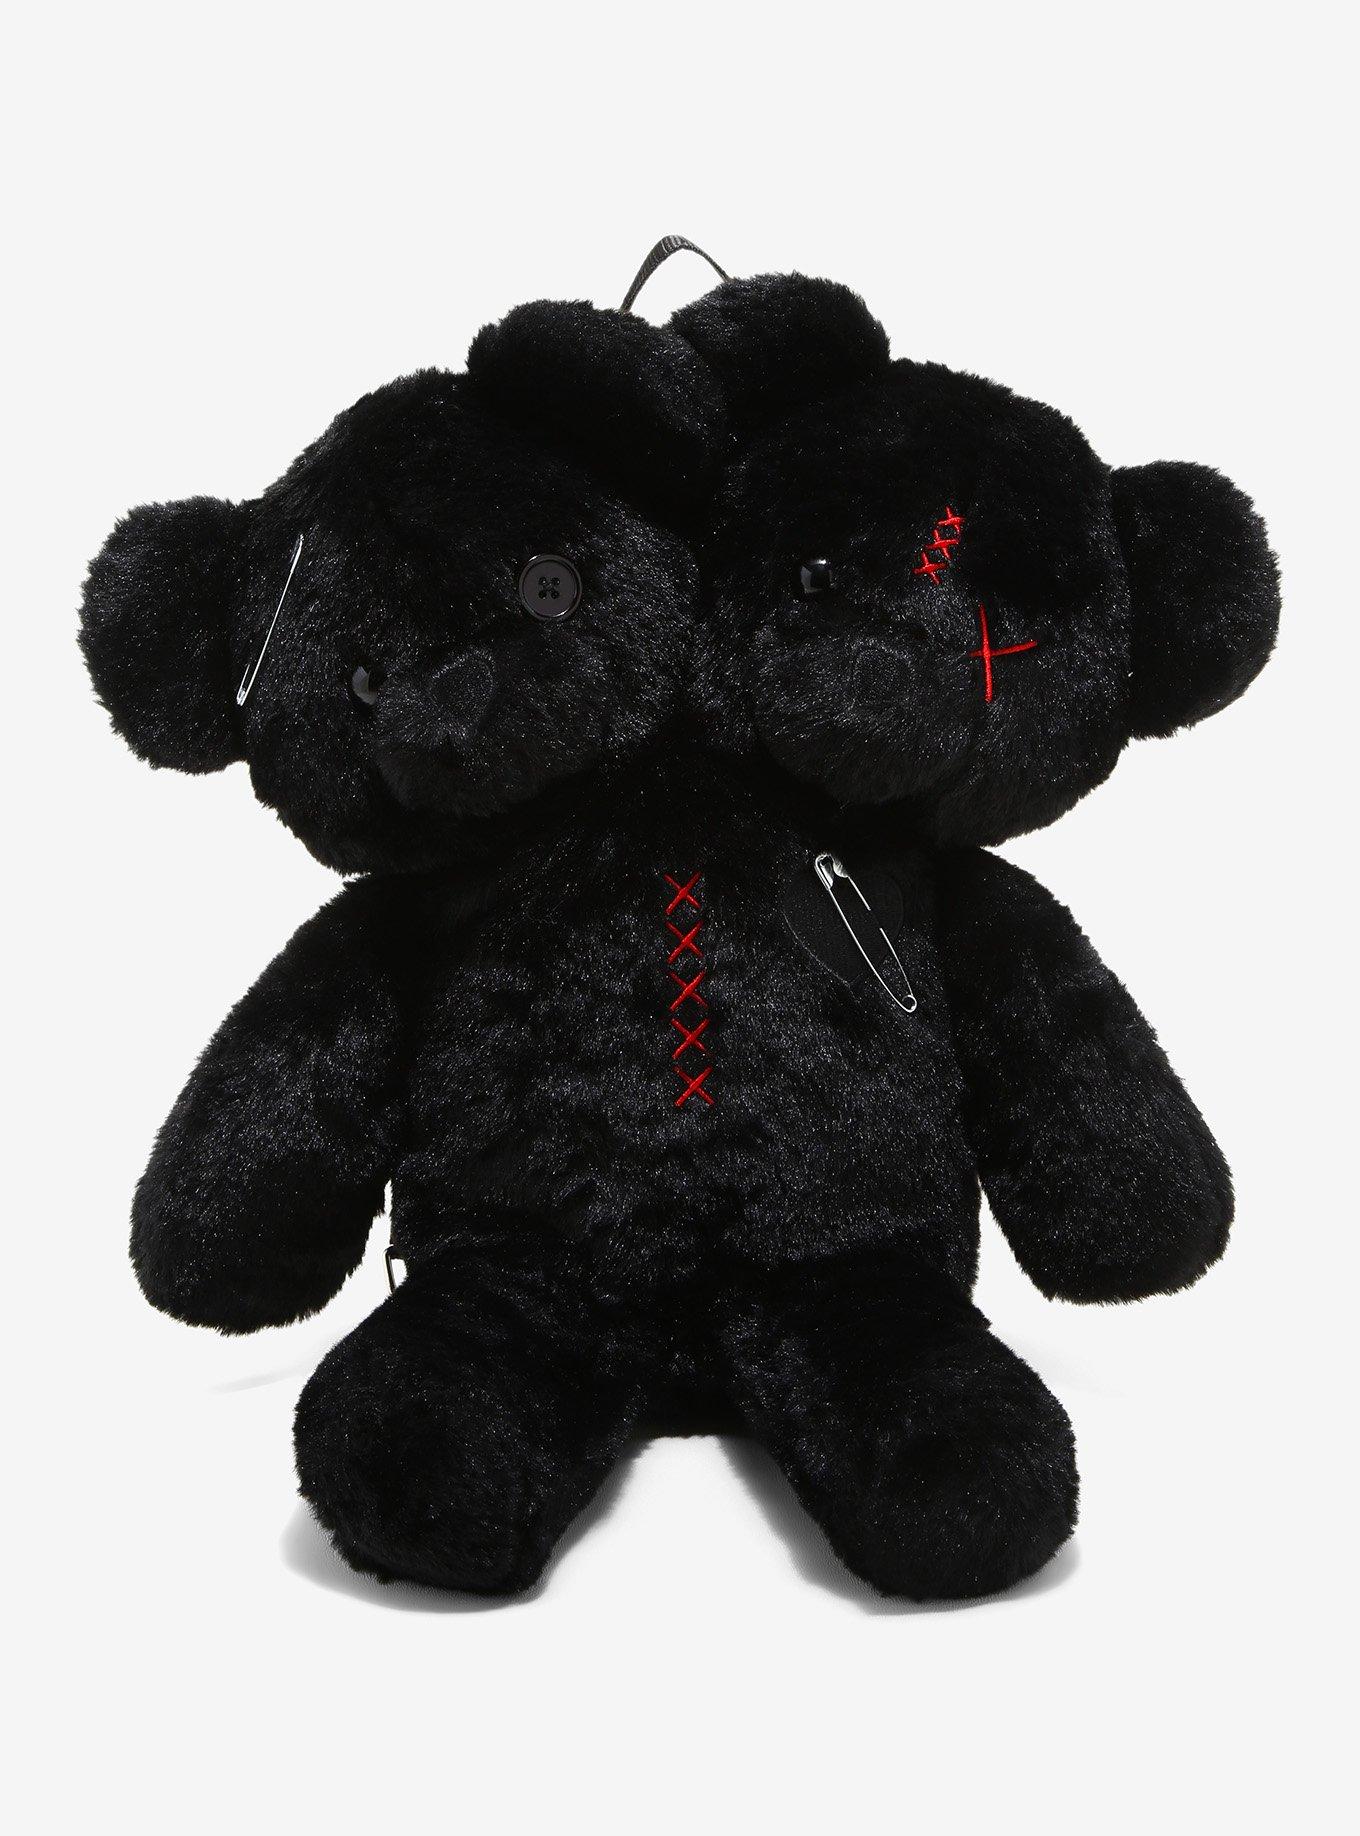 The gothic bear from hell backpack /shoulder bag